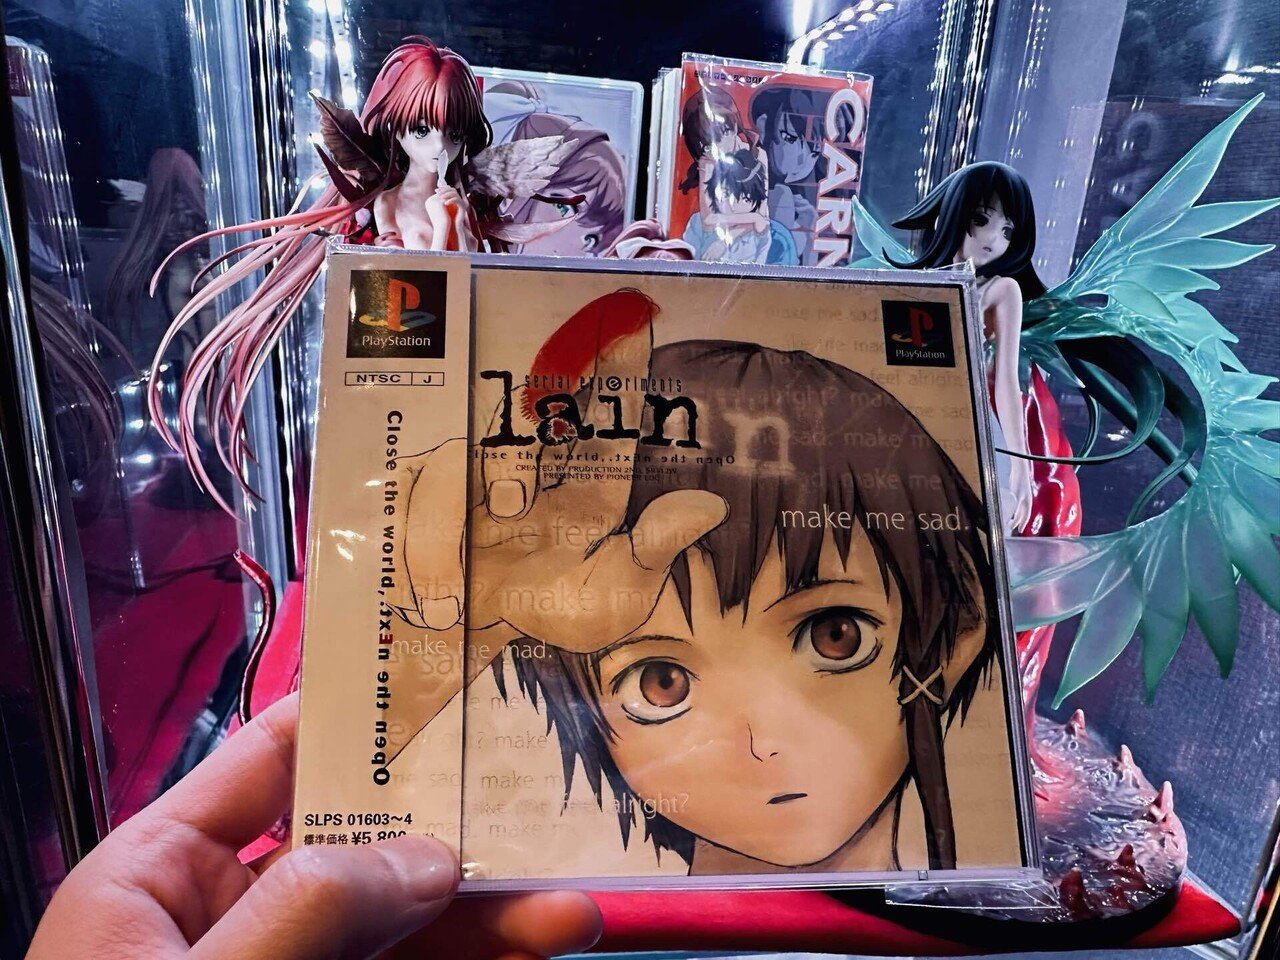 Serial experiments lain グロ